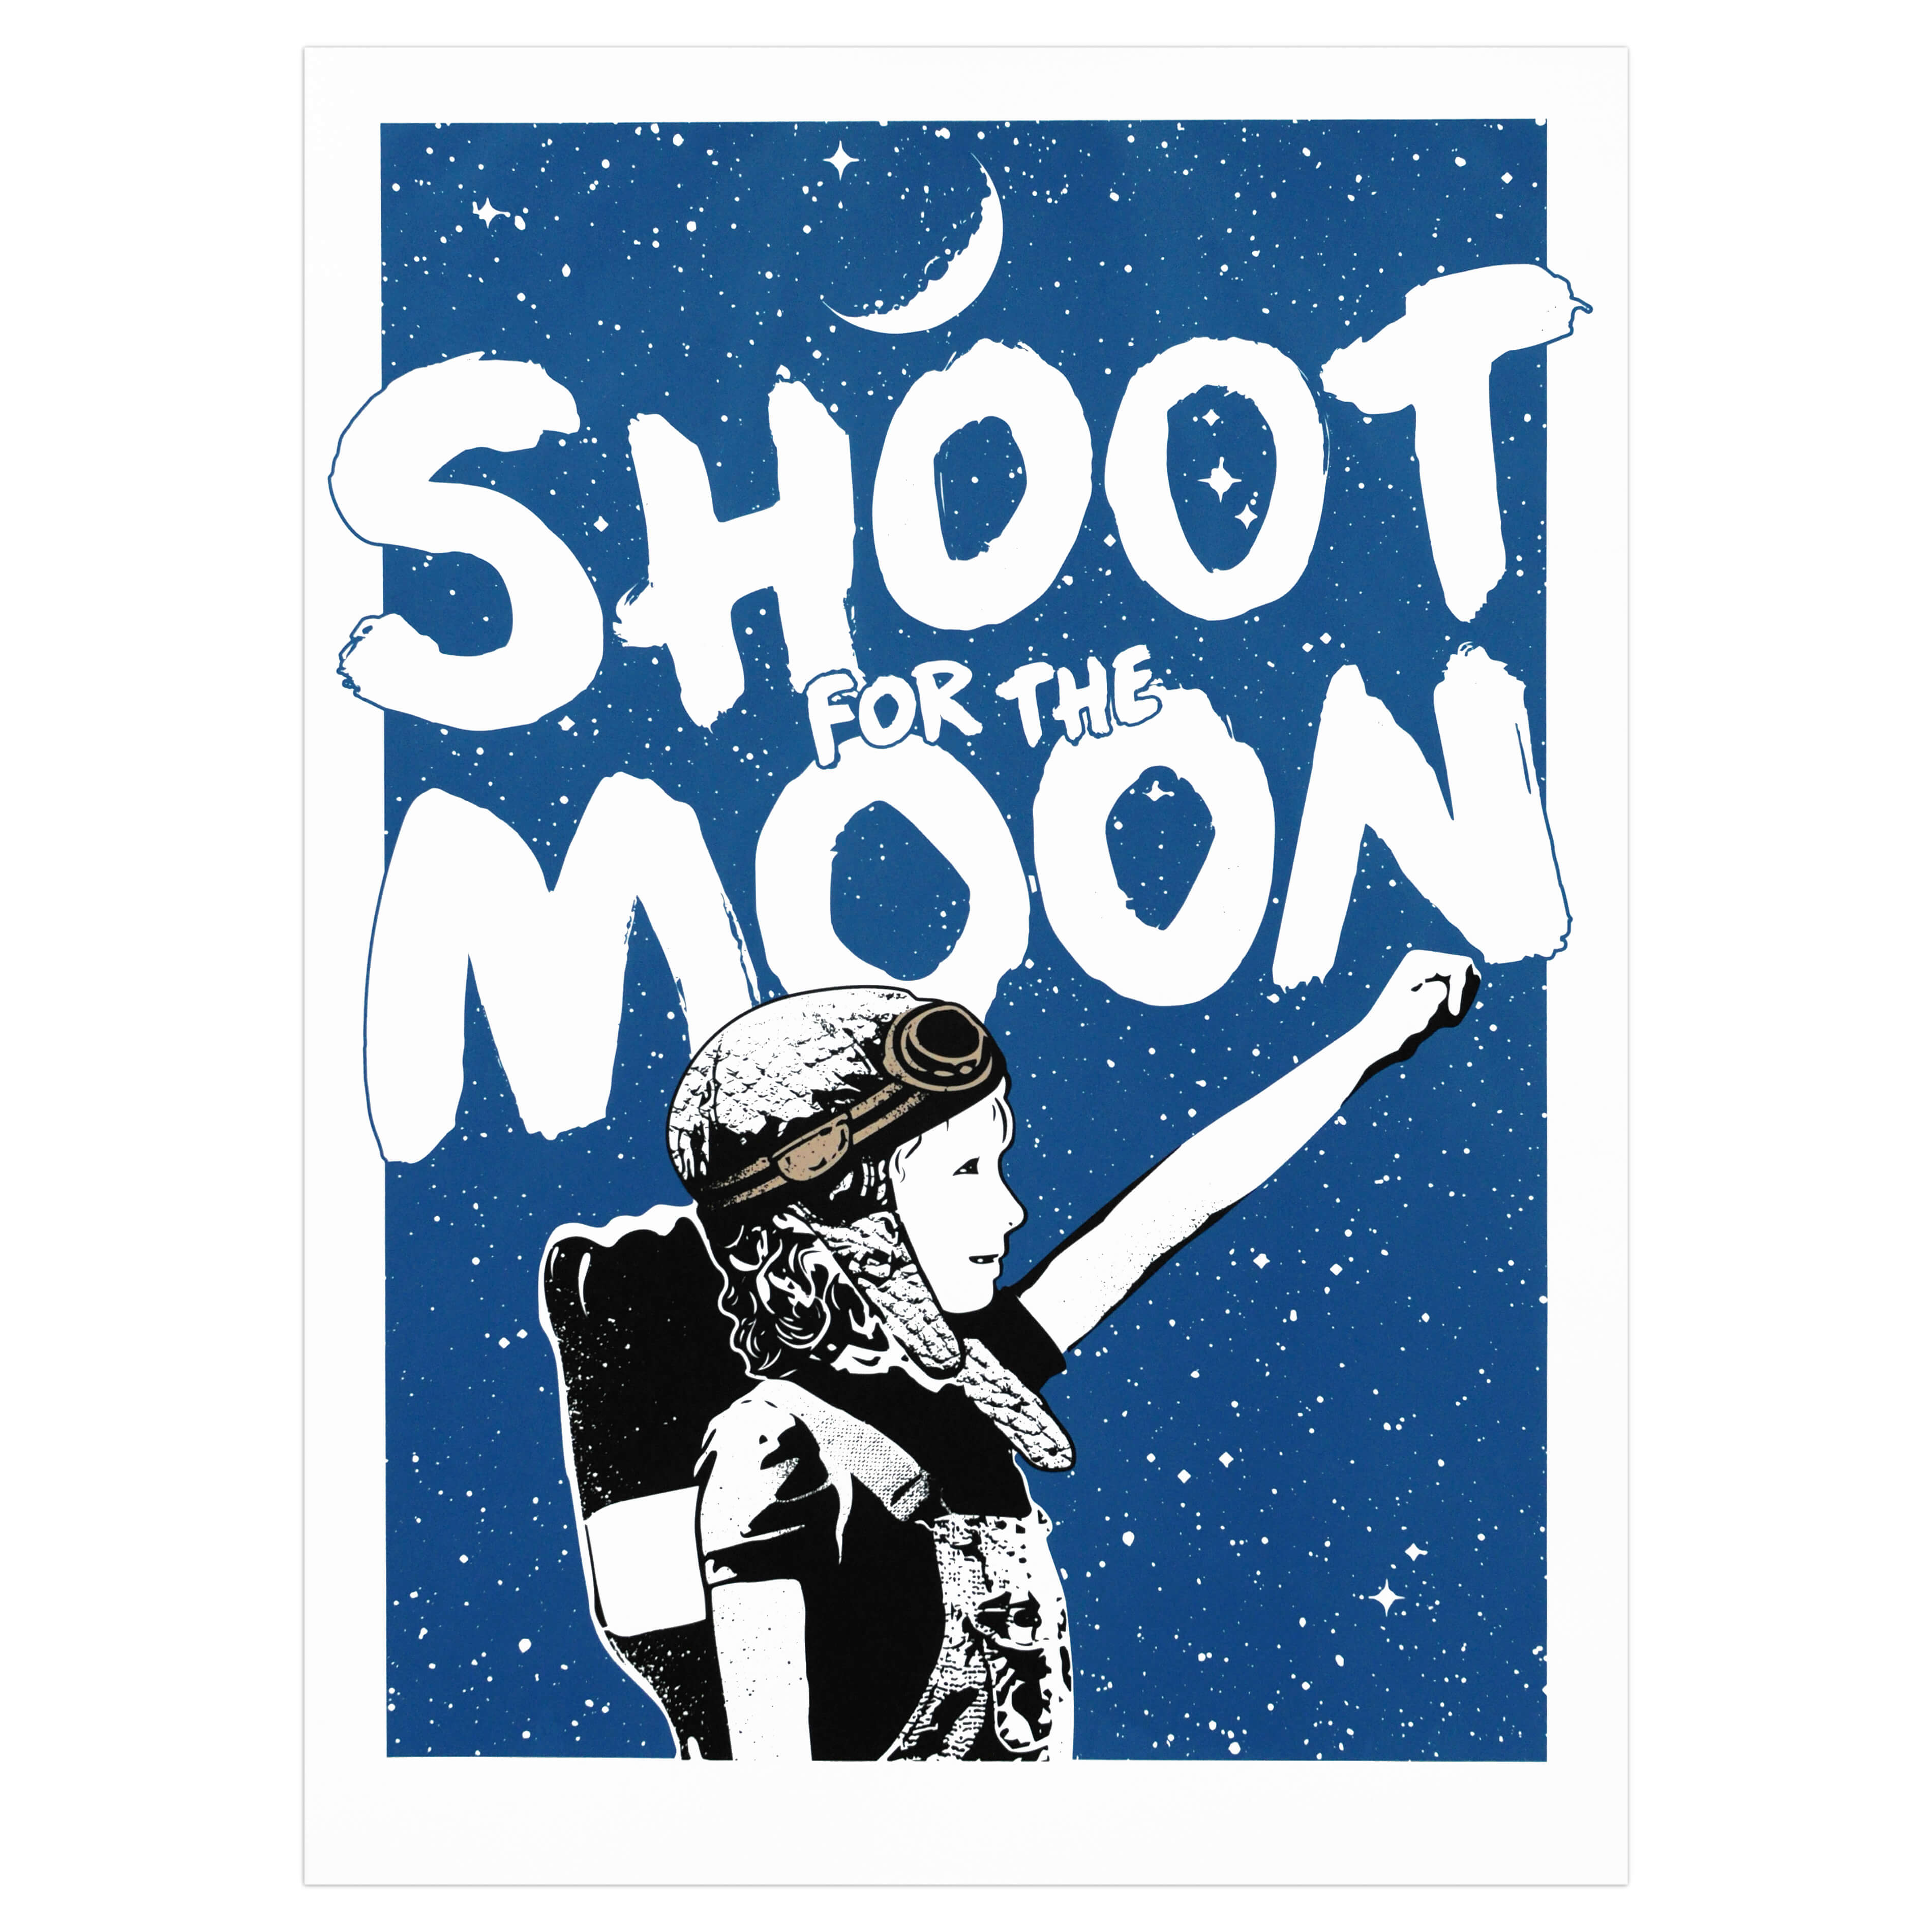 NME - Shoot For The Moon (Main Edition) Print